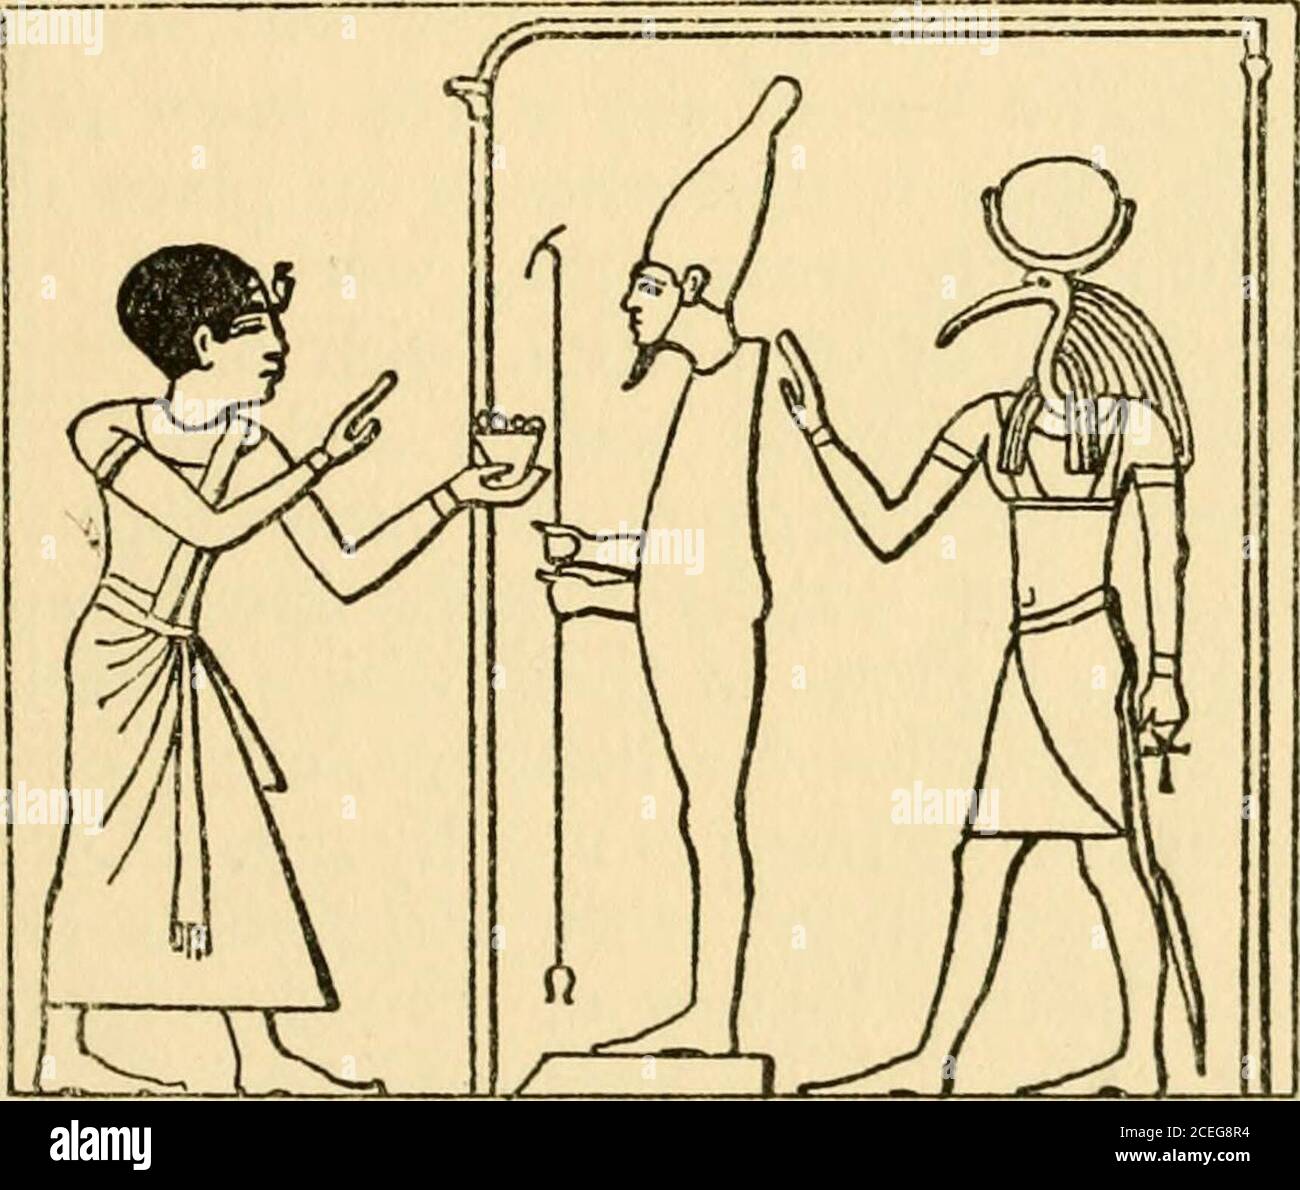 . Osiris and the Egyptian resurrection;. Seti I offering a breastplate and pectoral to Osiris.Marietta, Abydos, Vol. I, p. 51.. Seti I offering fruit to Osiris, behind whom stands Thoth.Mariette, Abydos, Vol. I, p. 74. them would provide the dead with everything theyrequired. These gods were in the Other World, andthe dead were there with them and under their rule and care. In some cases the Egyptians adopted another plan. 266 Osiris and the Egyptian Resurrection They prayed to the gods that offerings might be givento the dead, and they also entreated every visitorto a tomb to do Hkewise ; as Stock Photo